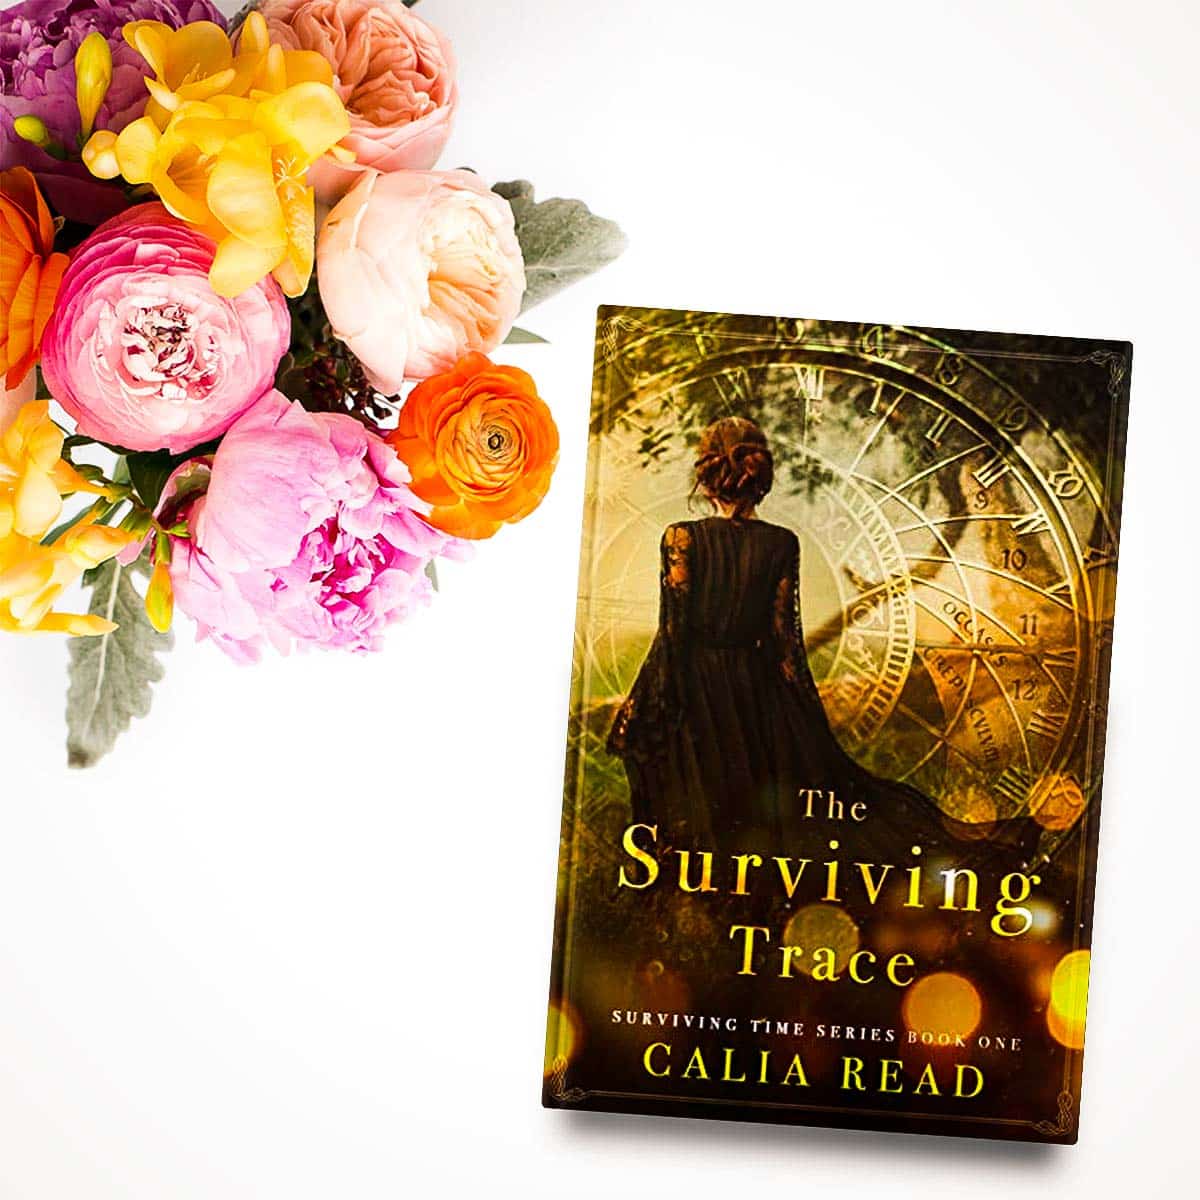 The Surviving Trace by Calia Read is a heart-pounding time-traveling romantic suspense - historical romance that will leave you on the edge of your seat!